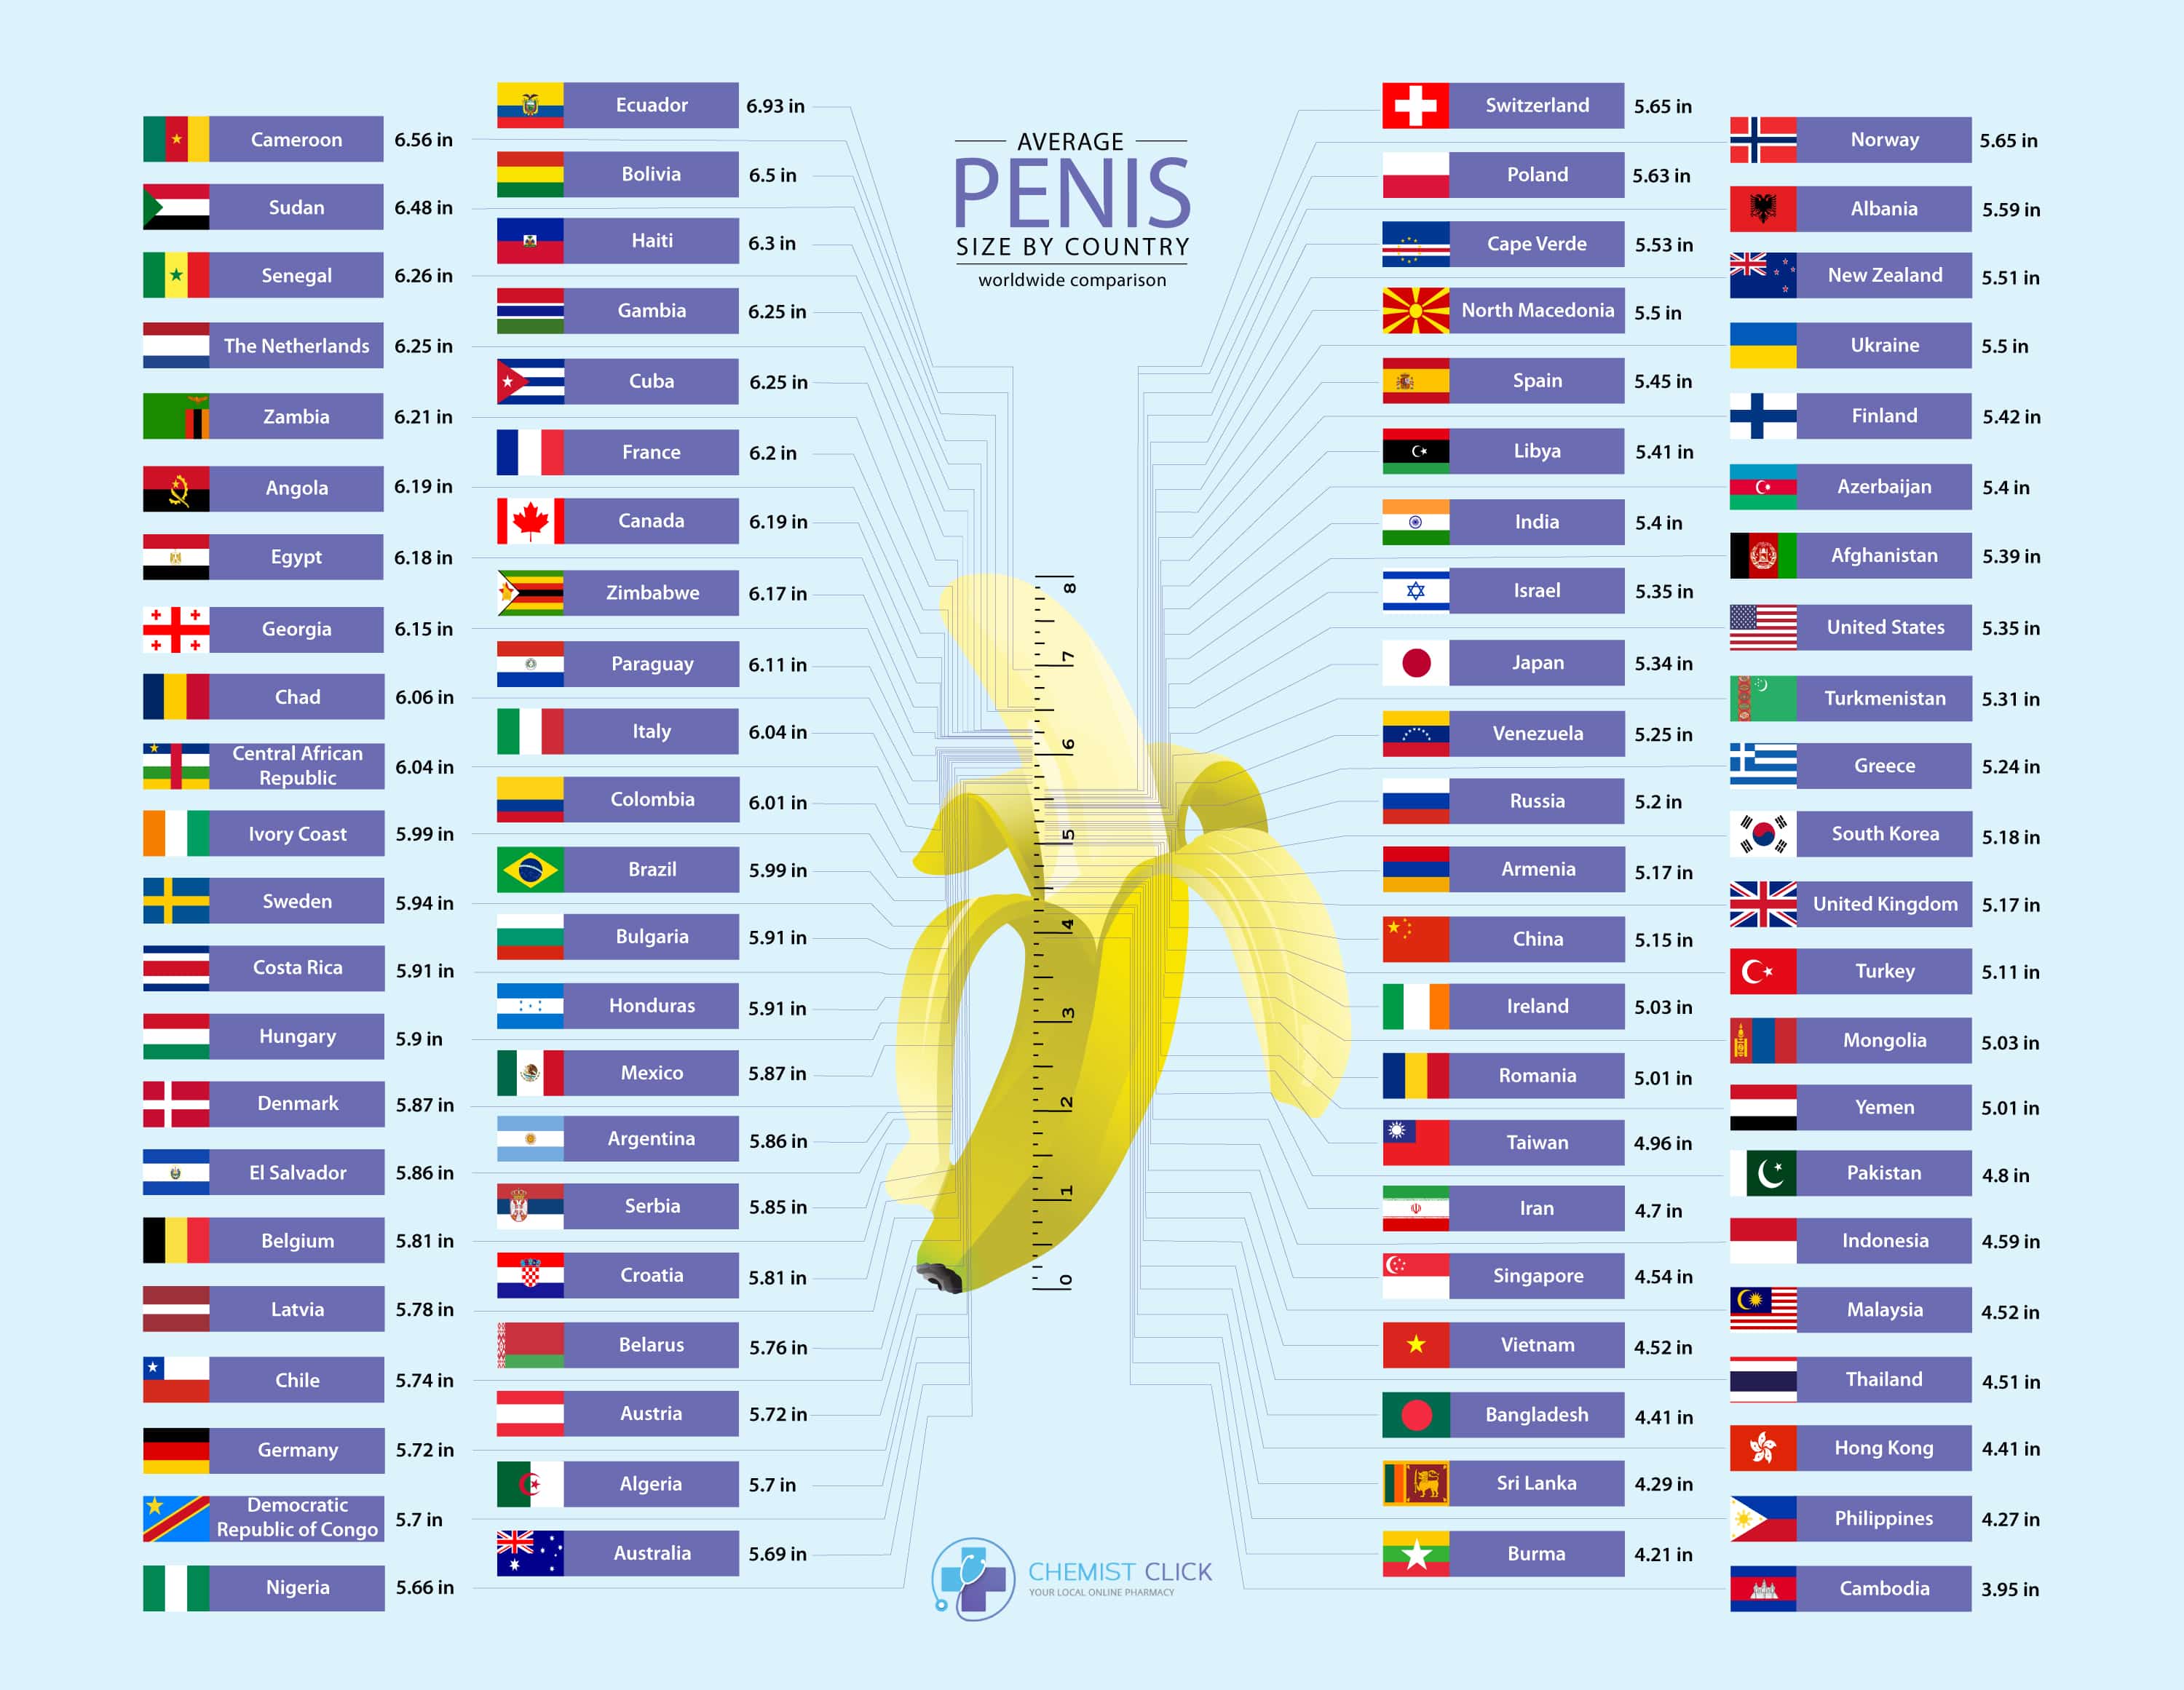 Largest dick size by country